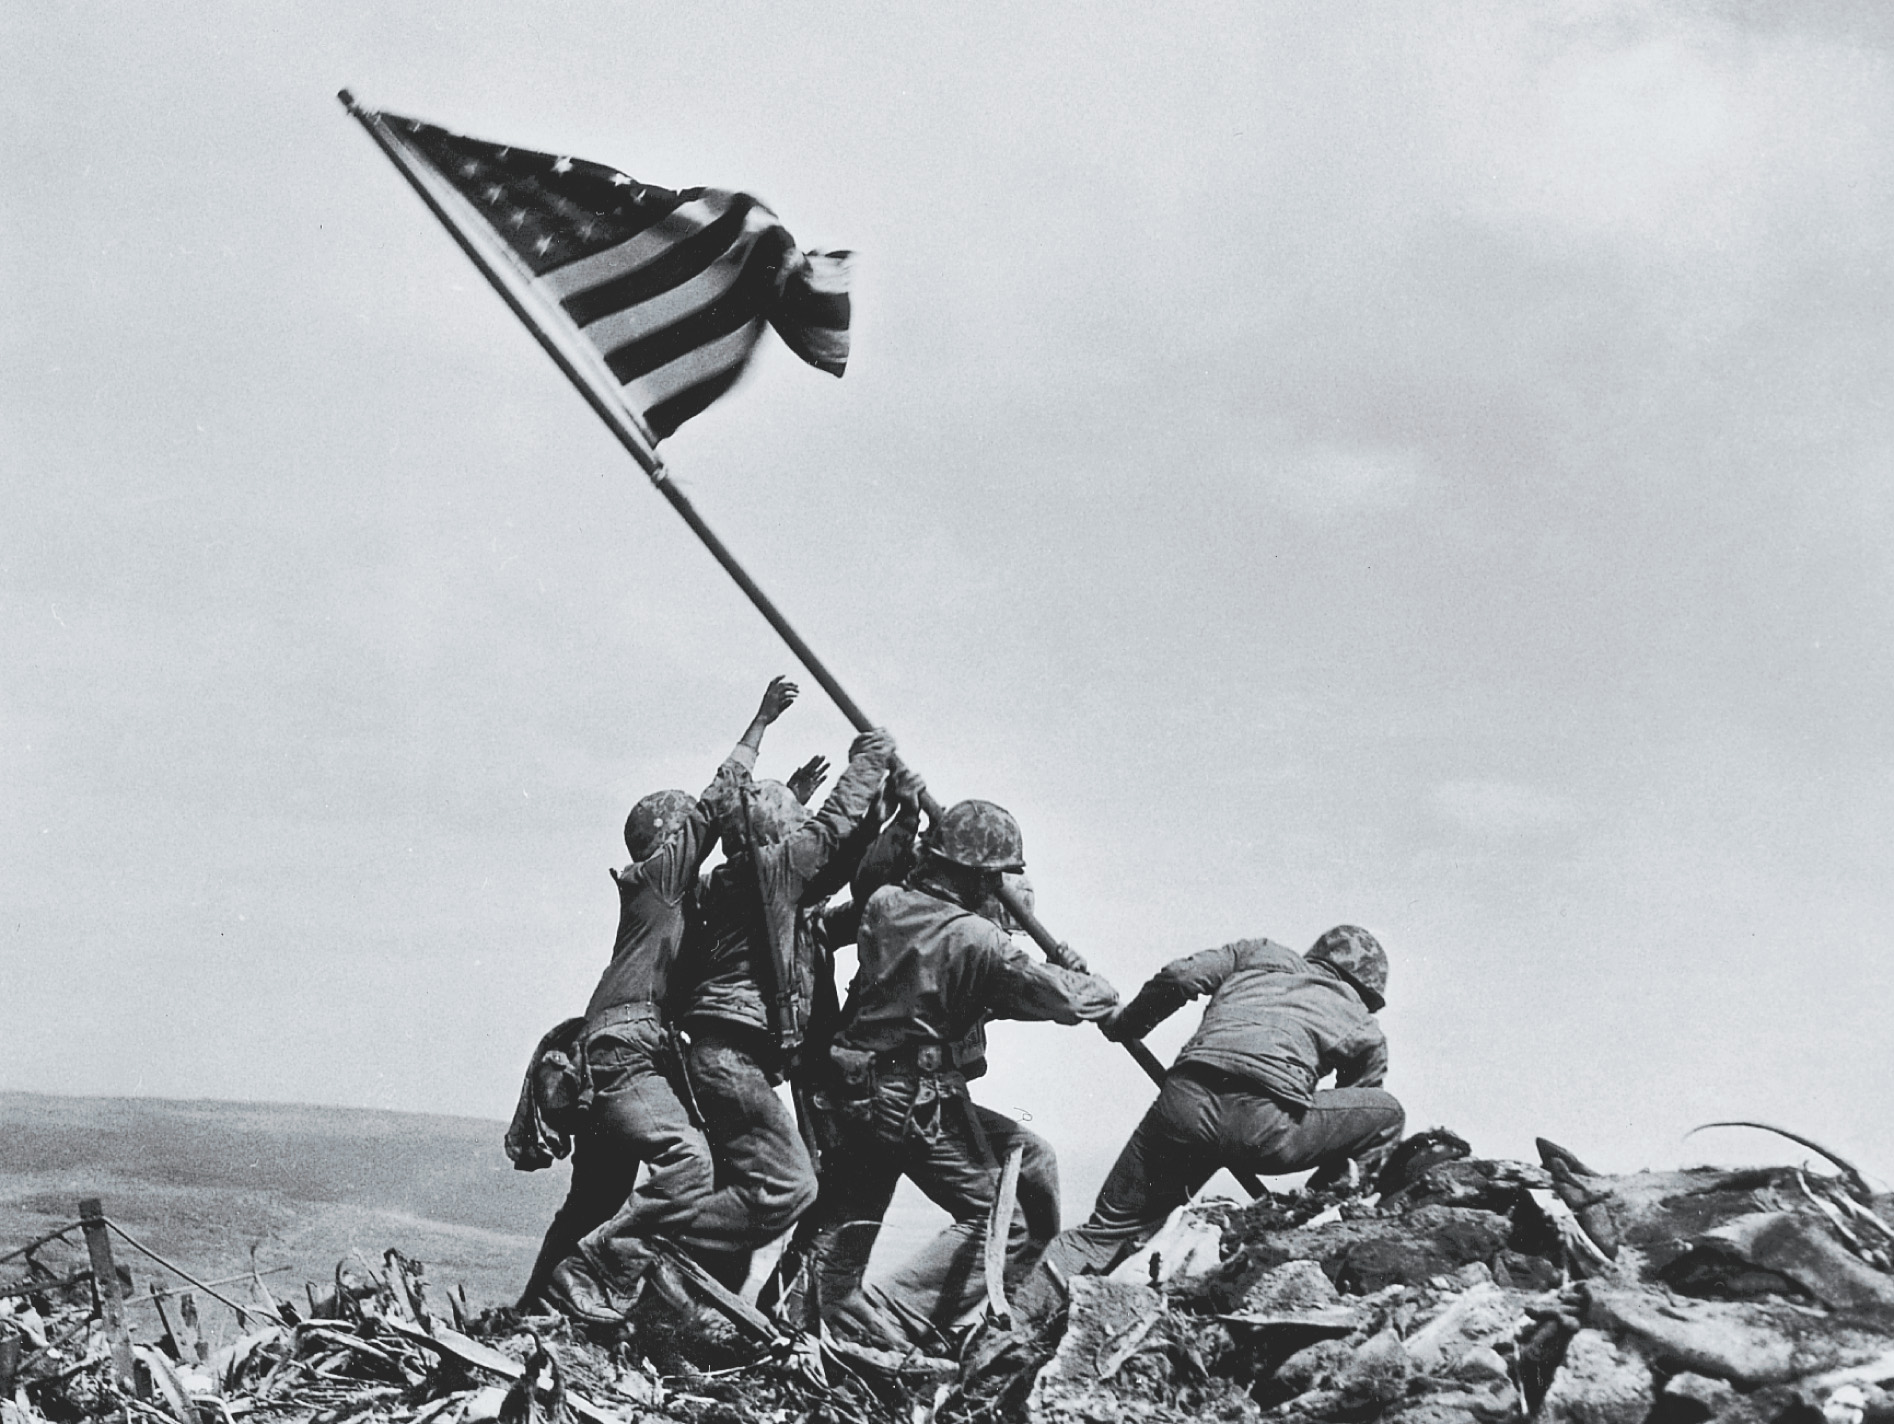 Photo: Holding a flagpole at an angle, Marines plant its end in a pile of rubble.